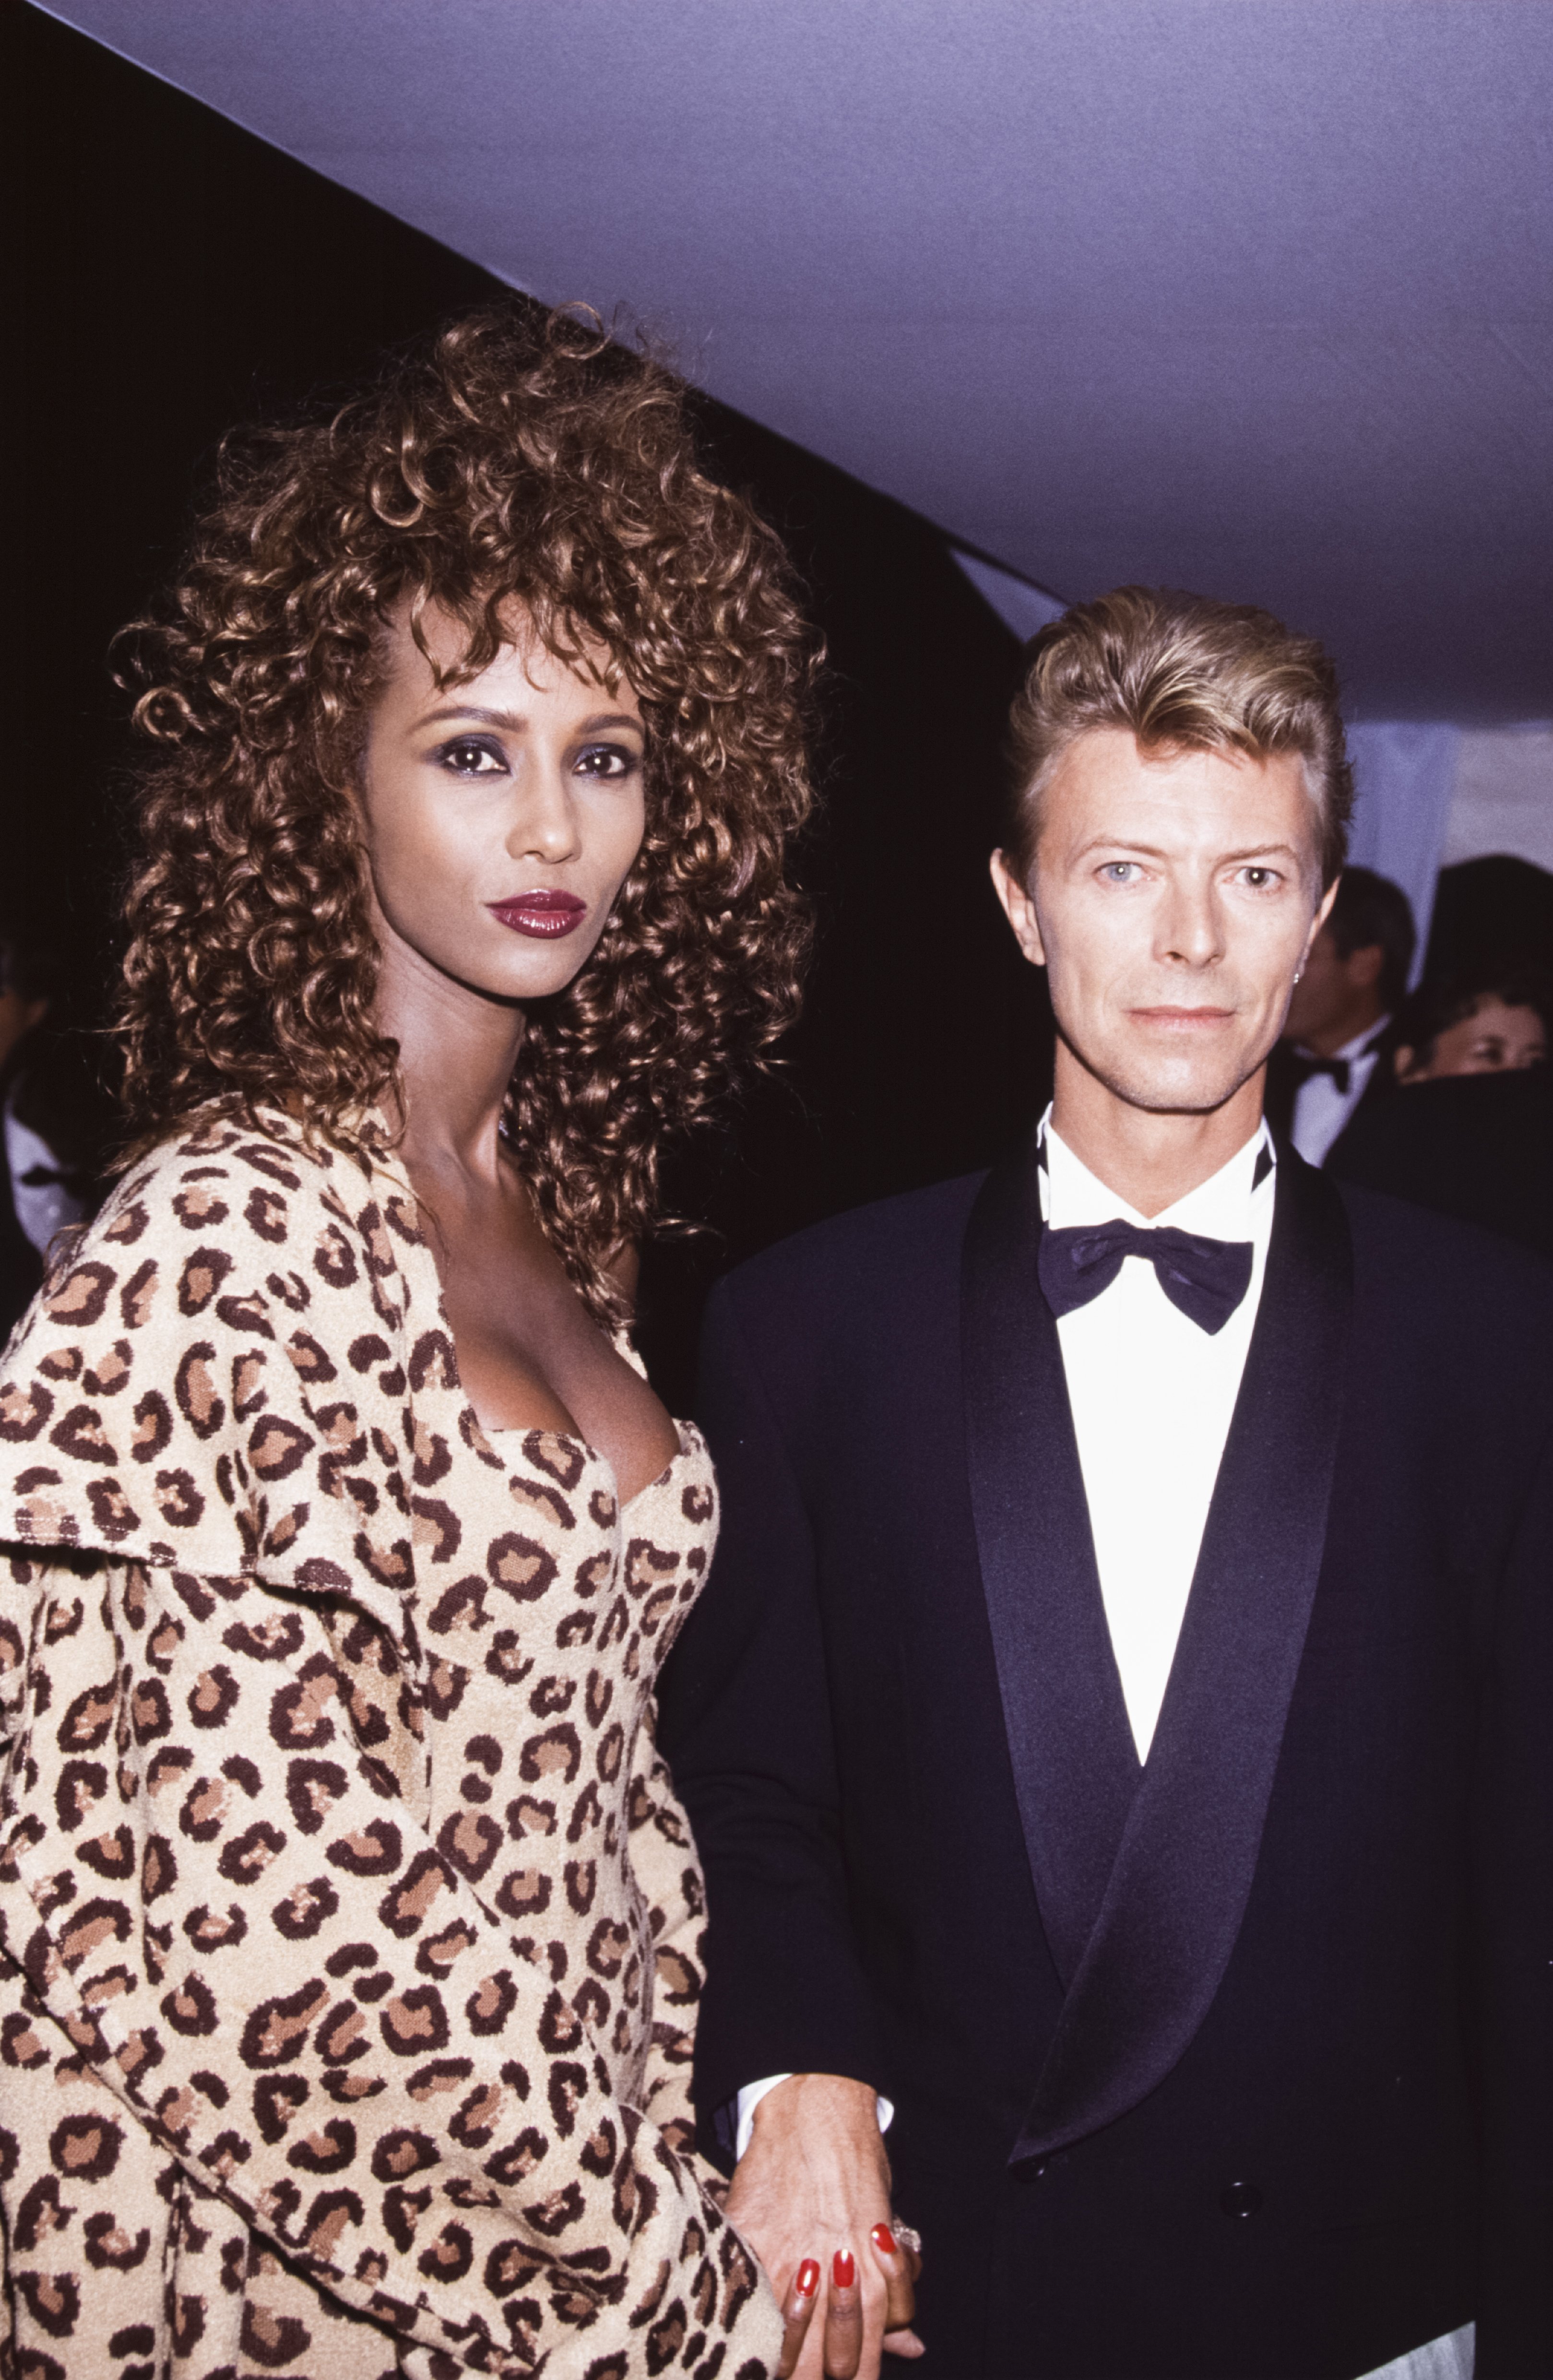 David Bowie with his wife Iman in September 1991 in Versailles, France | Source: Getty Images